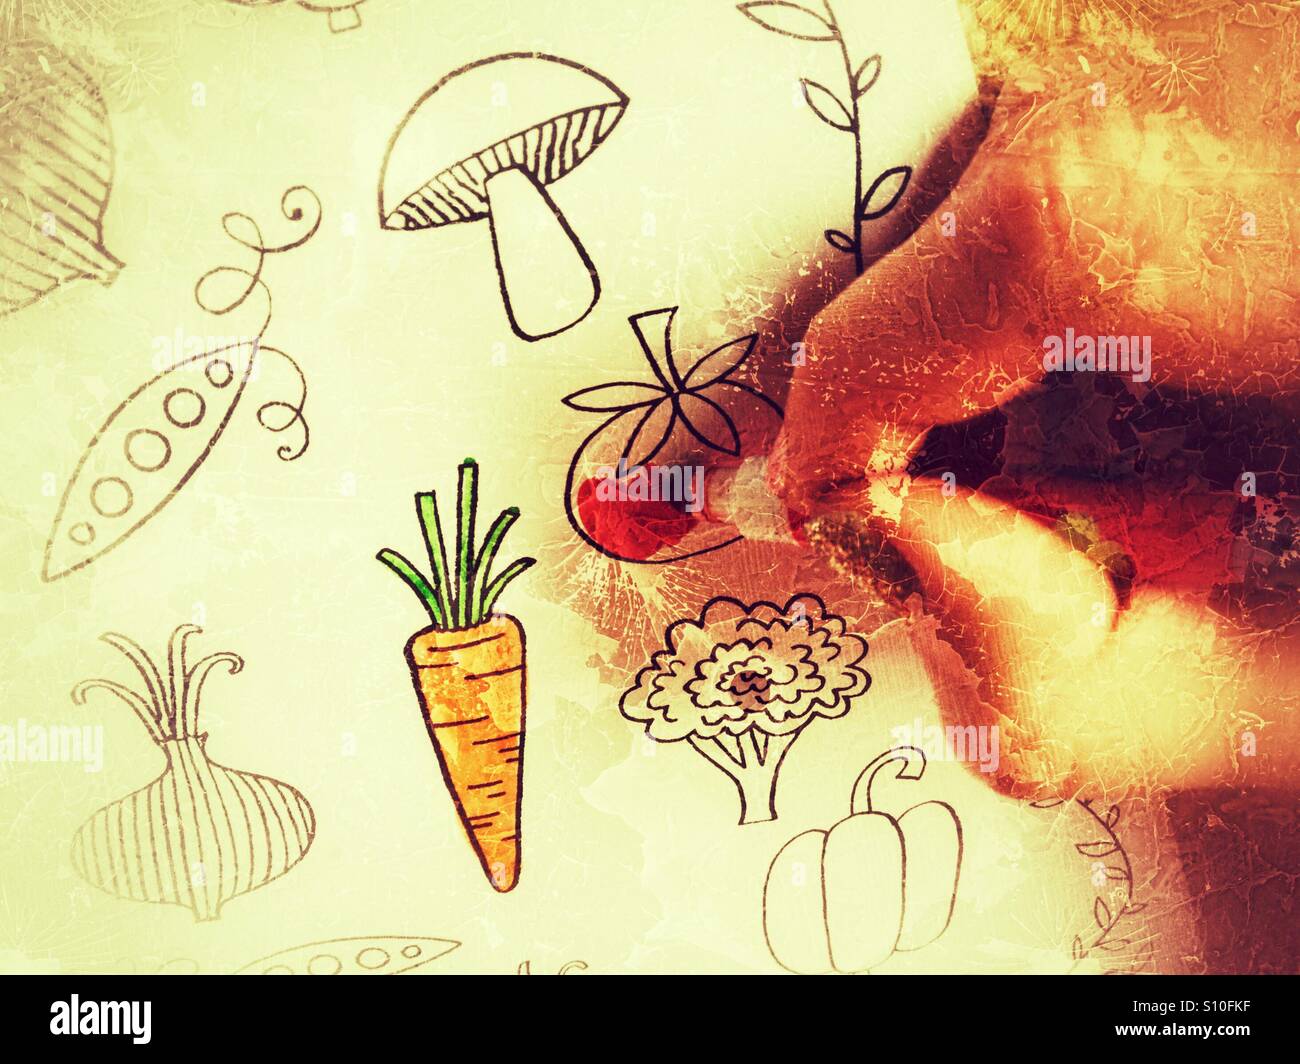 Child's hand colouring drawing of vegetables Stock Photo